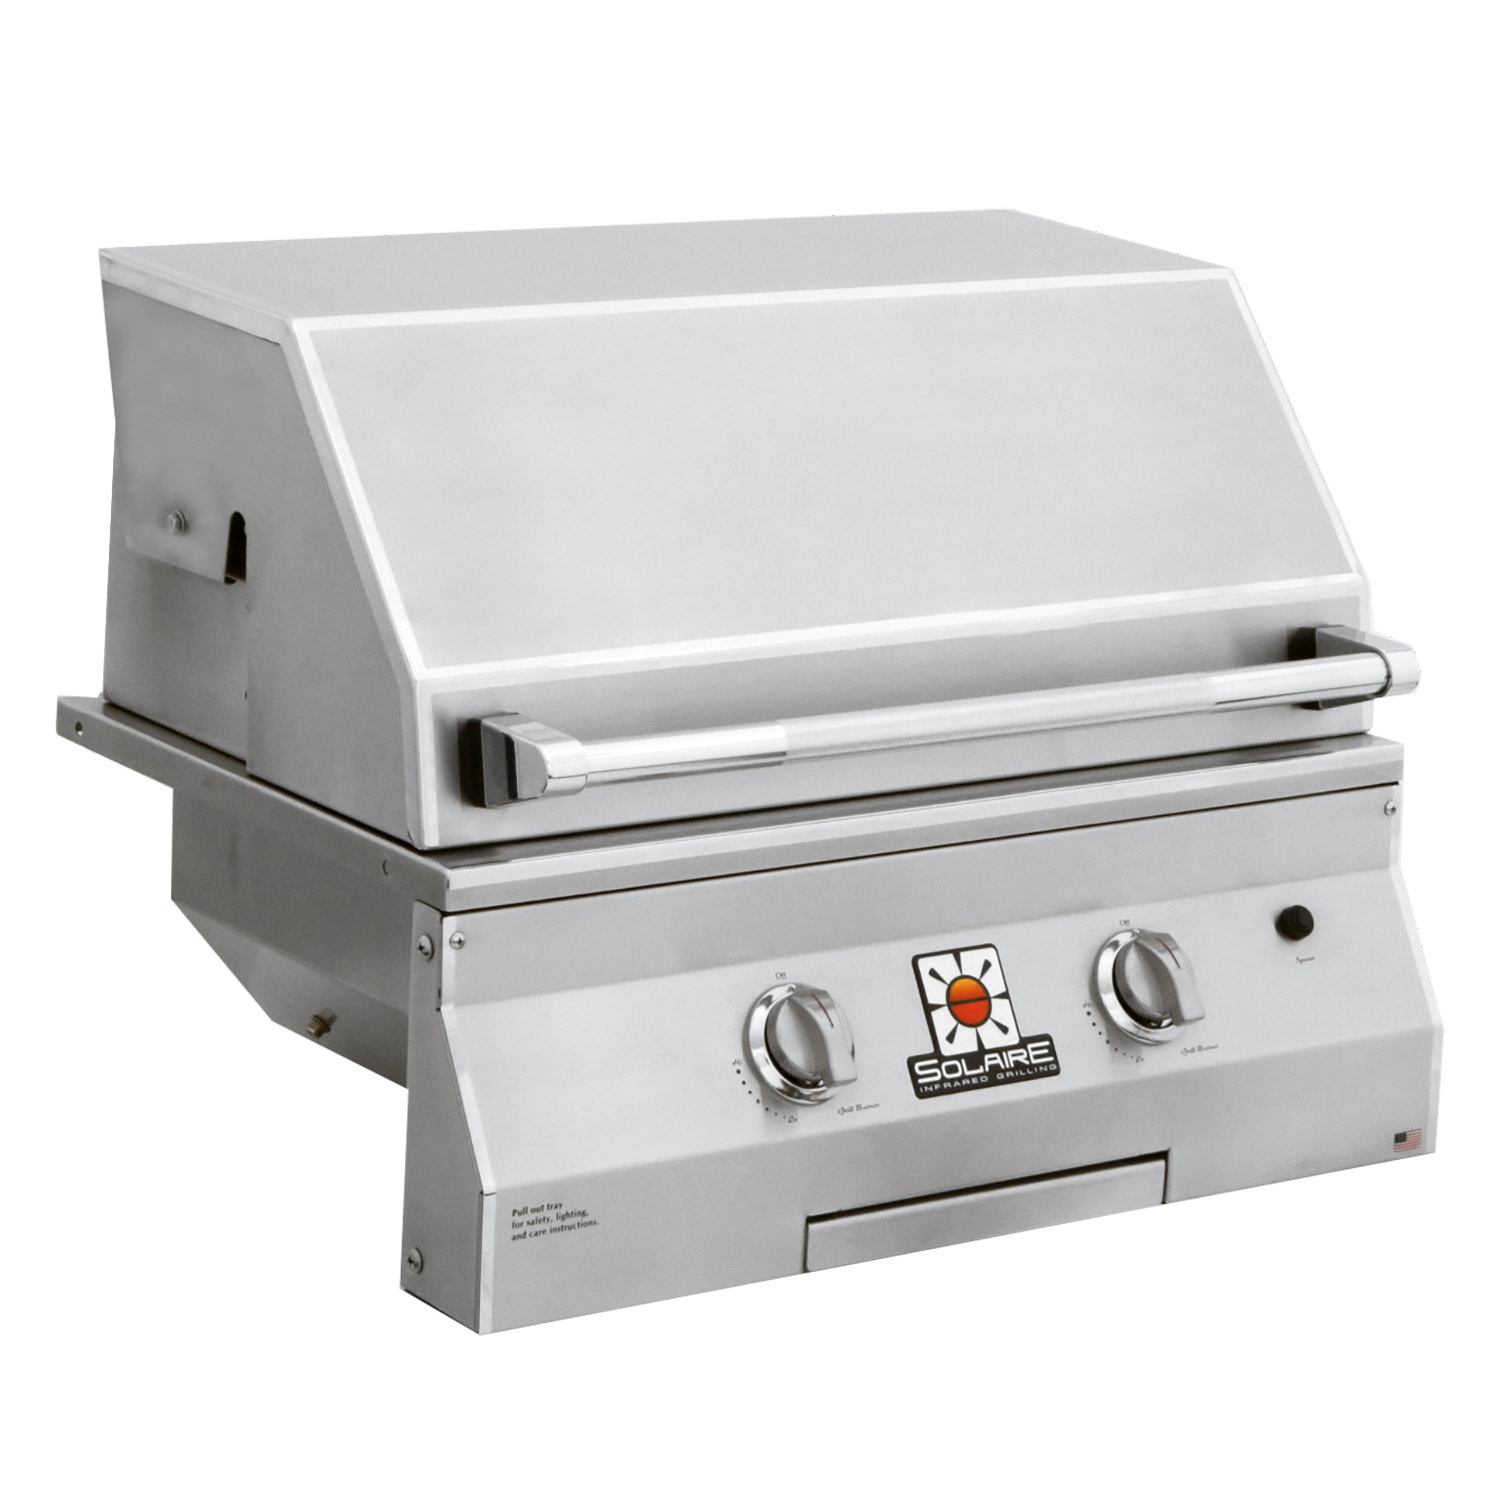 Solaire Standard Infrared Built-In Grill, 27-Inches, Natural Gas - image 1 of 6